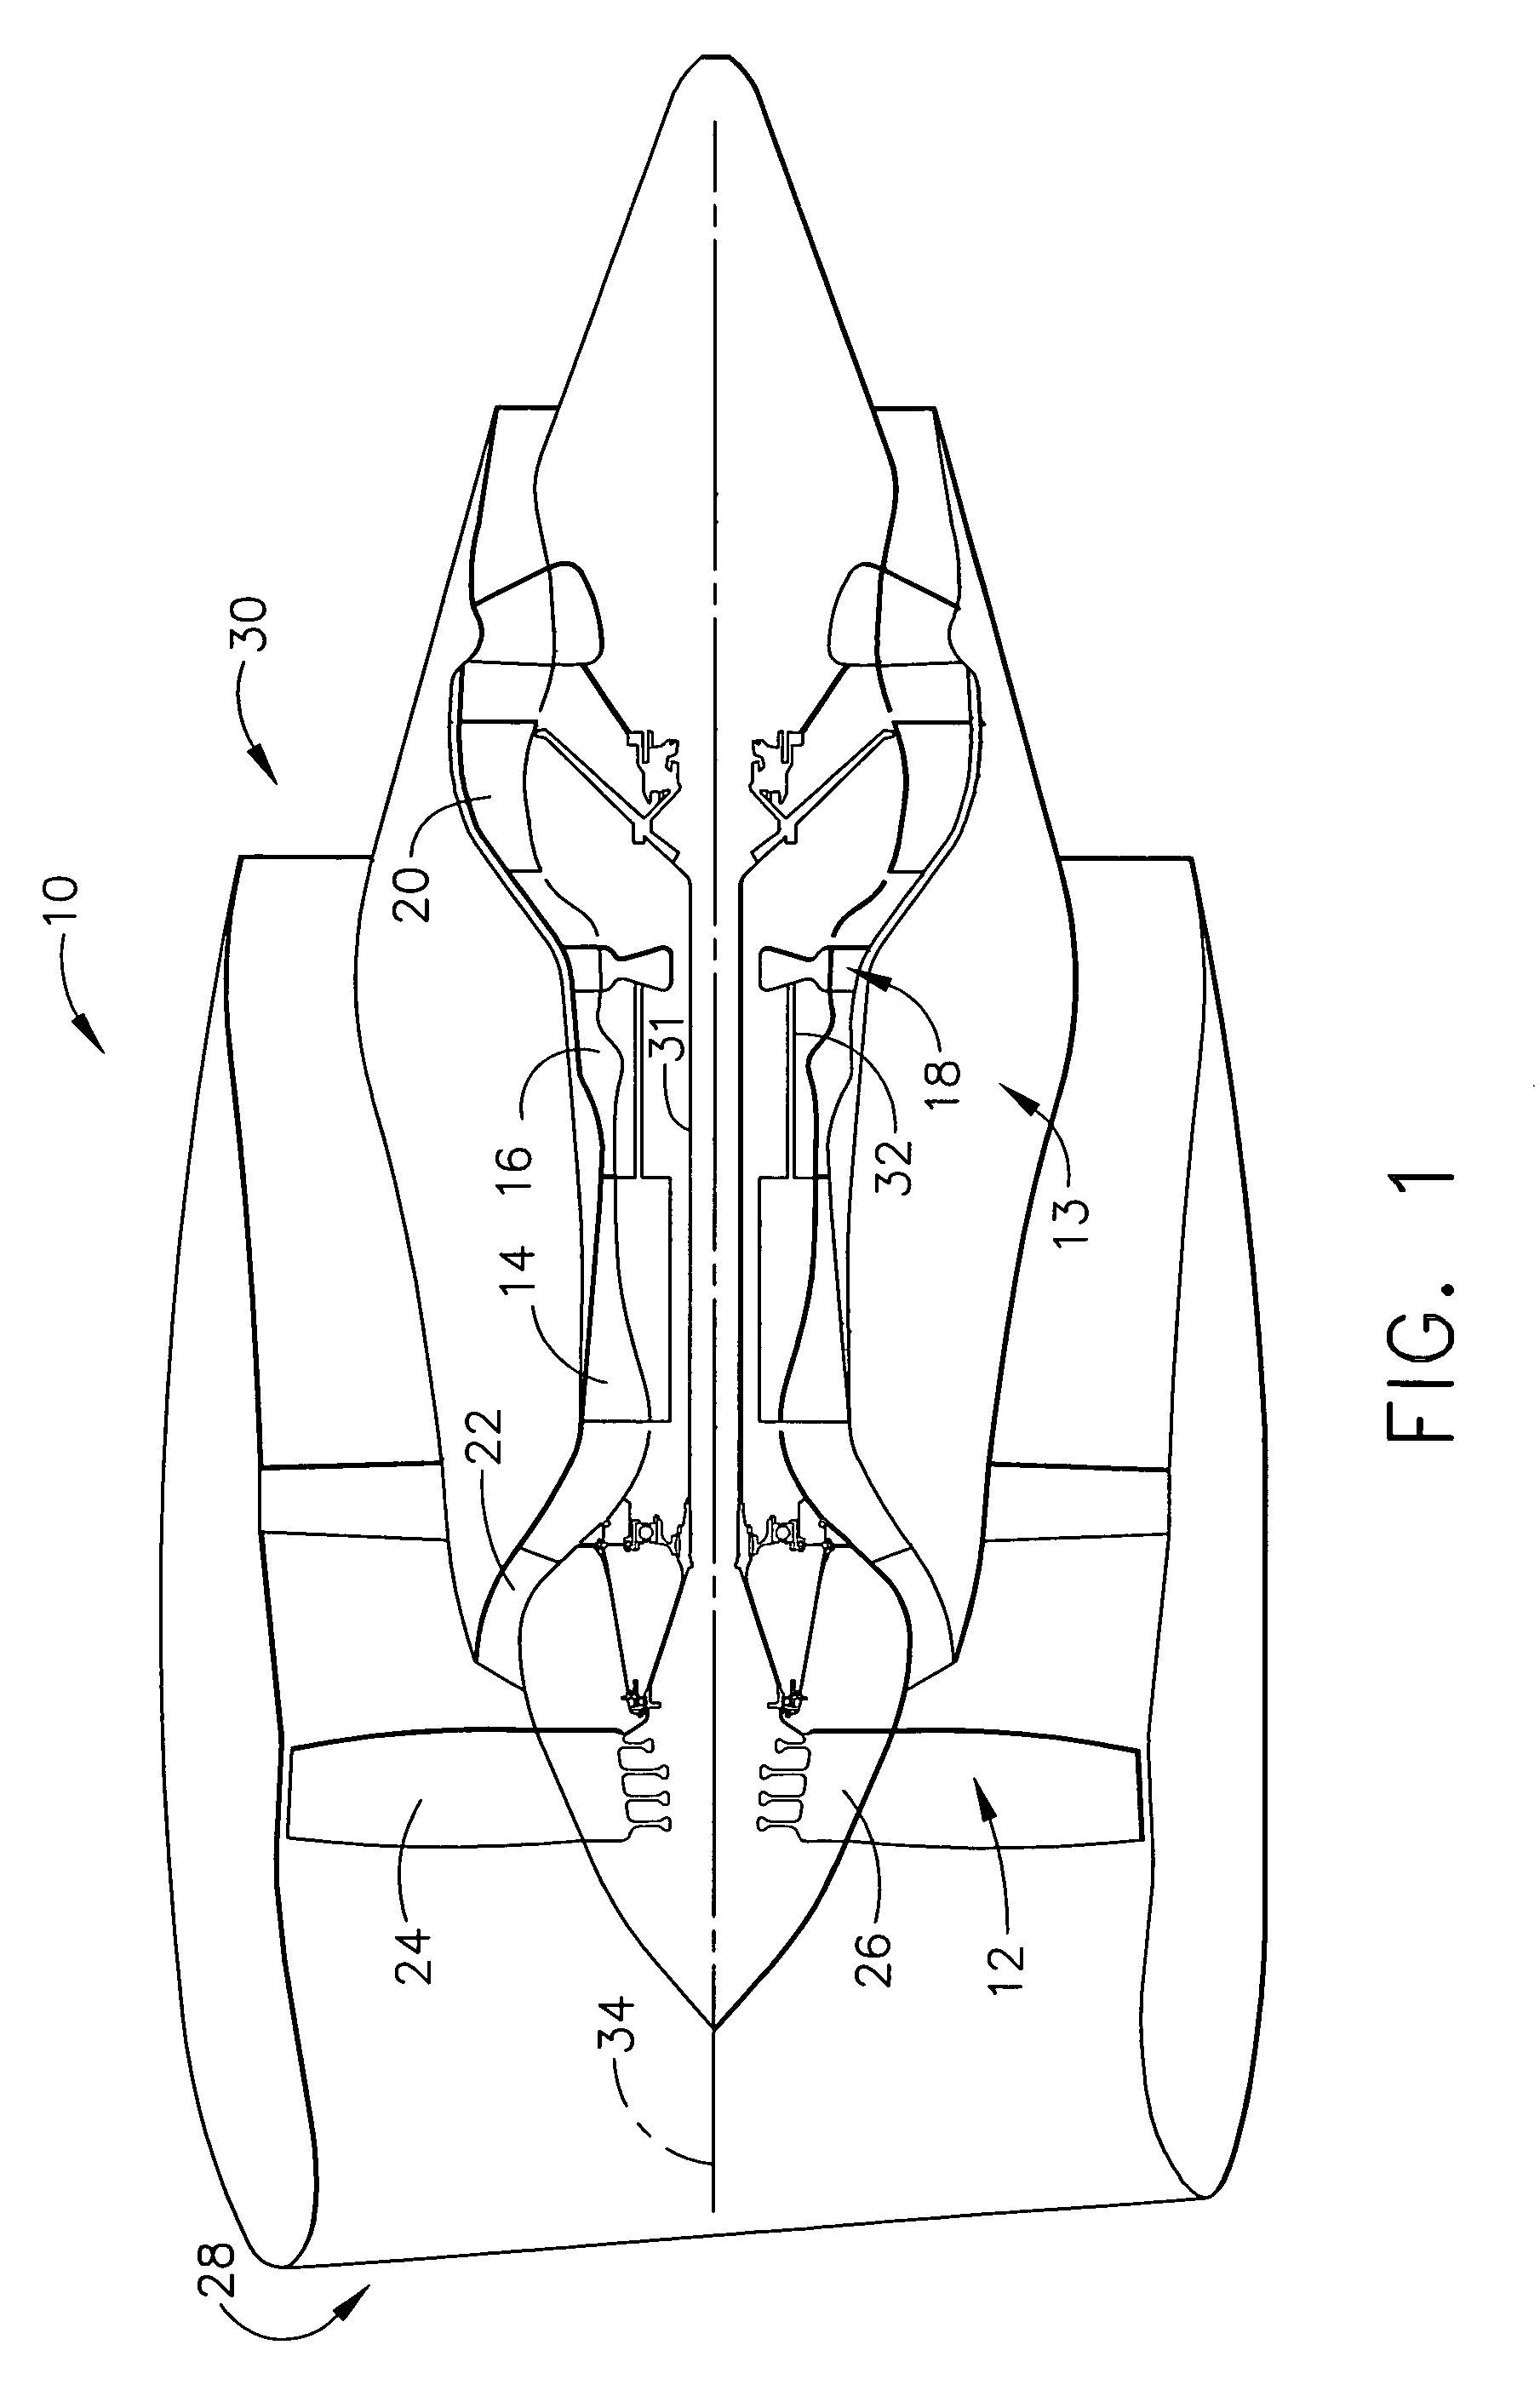 Apparatus for centering rotor assembly bearings